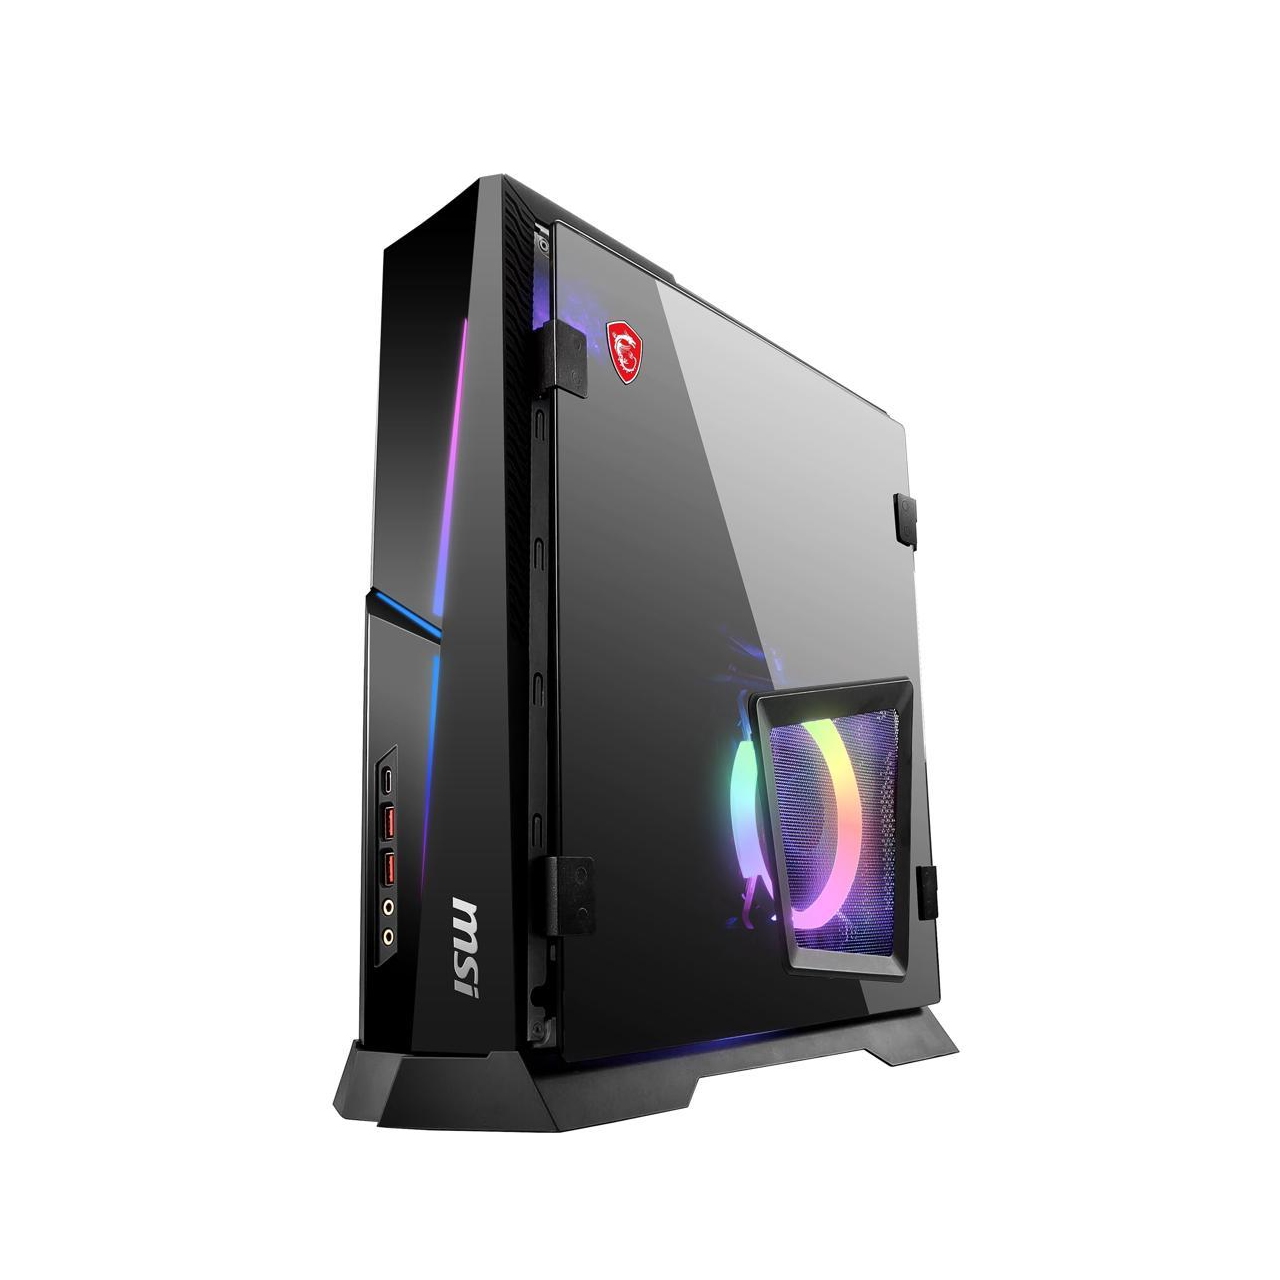 Best gaming PC of 2021 5